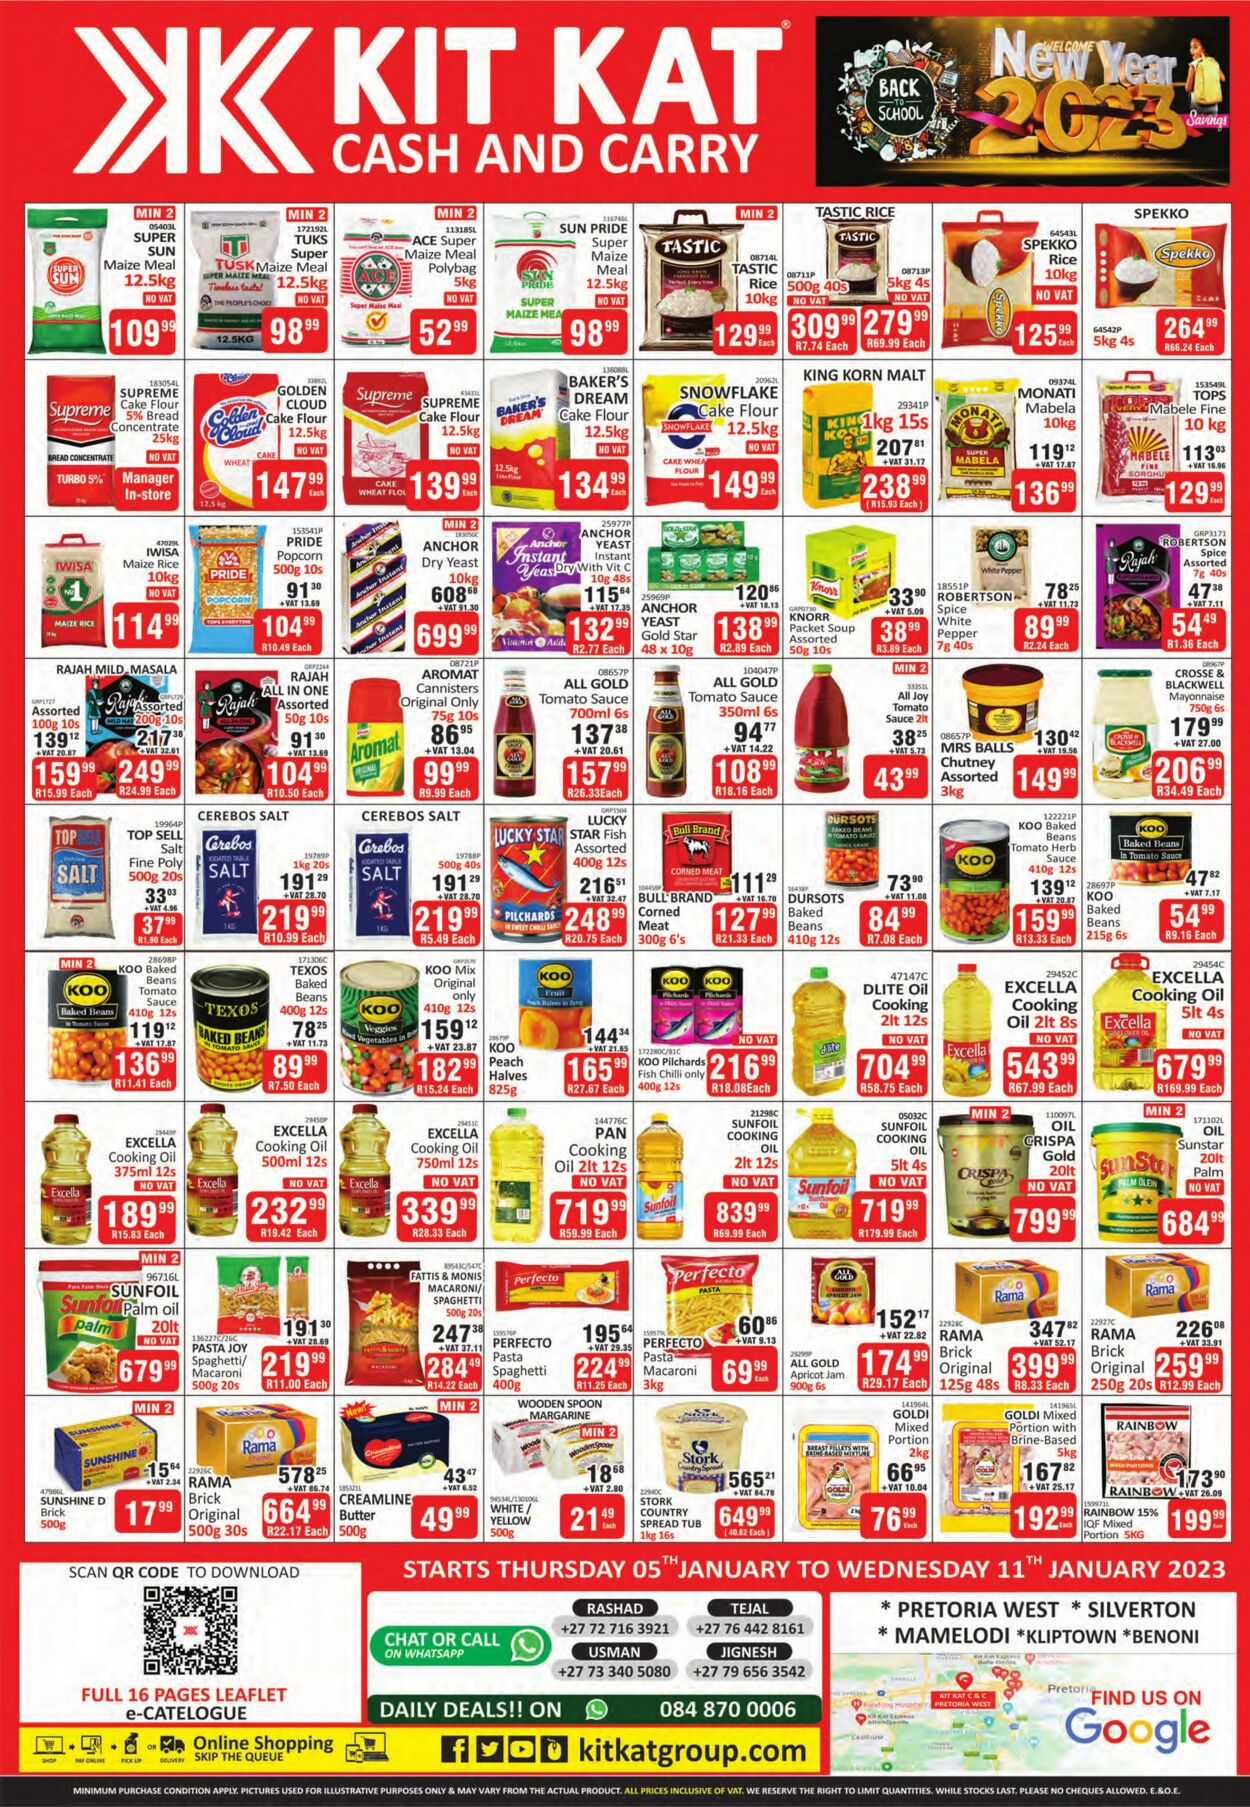 Special Kit Kat Cash and Carry 05.01.2023 - 11.01.2023